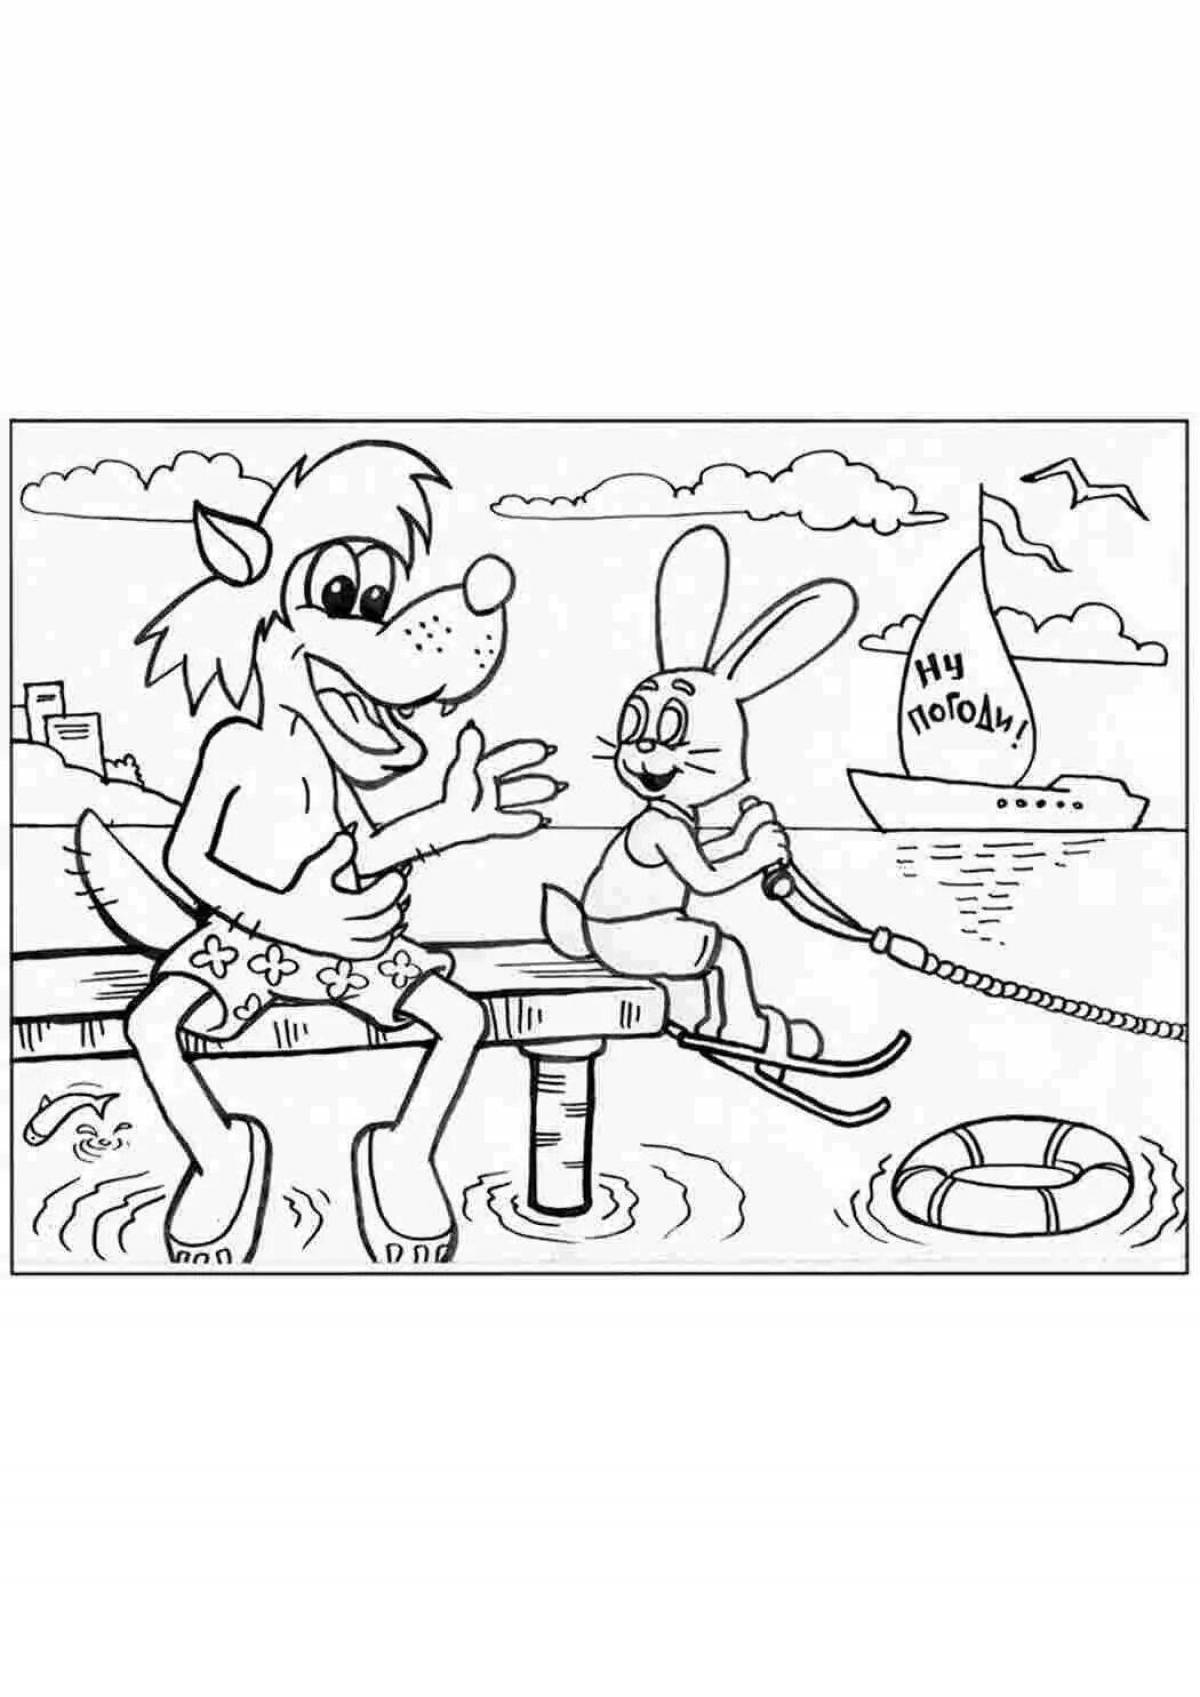 Coloring book cheerful hare and wolf